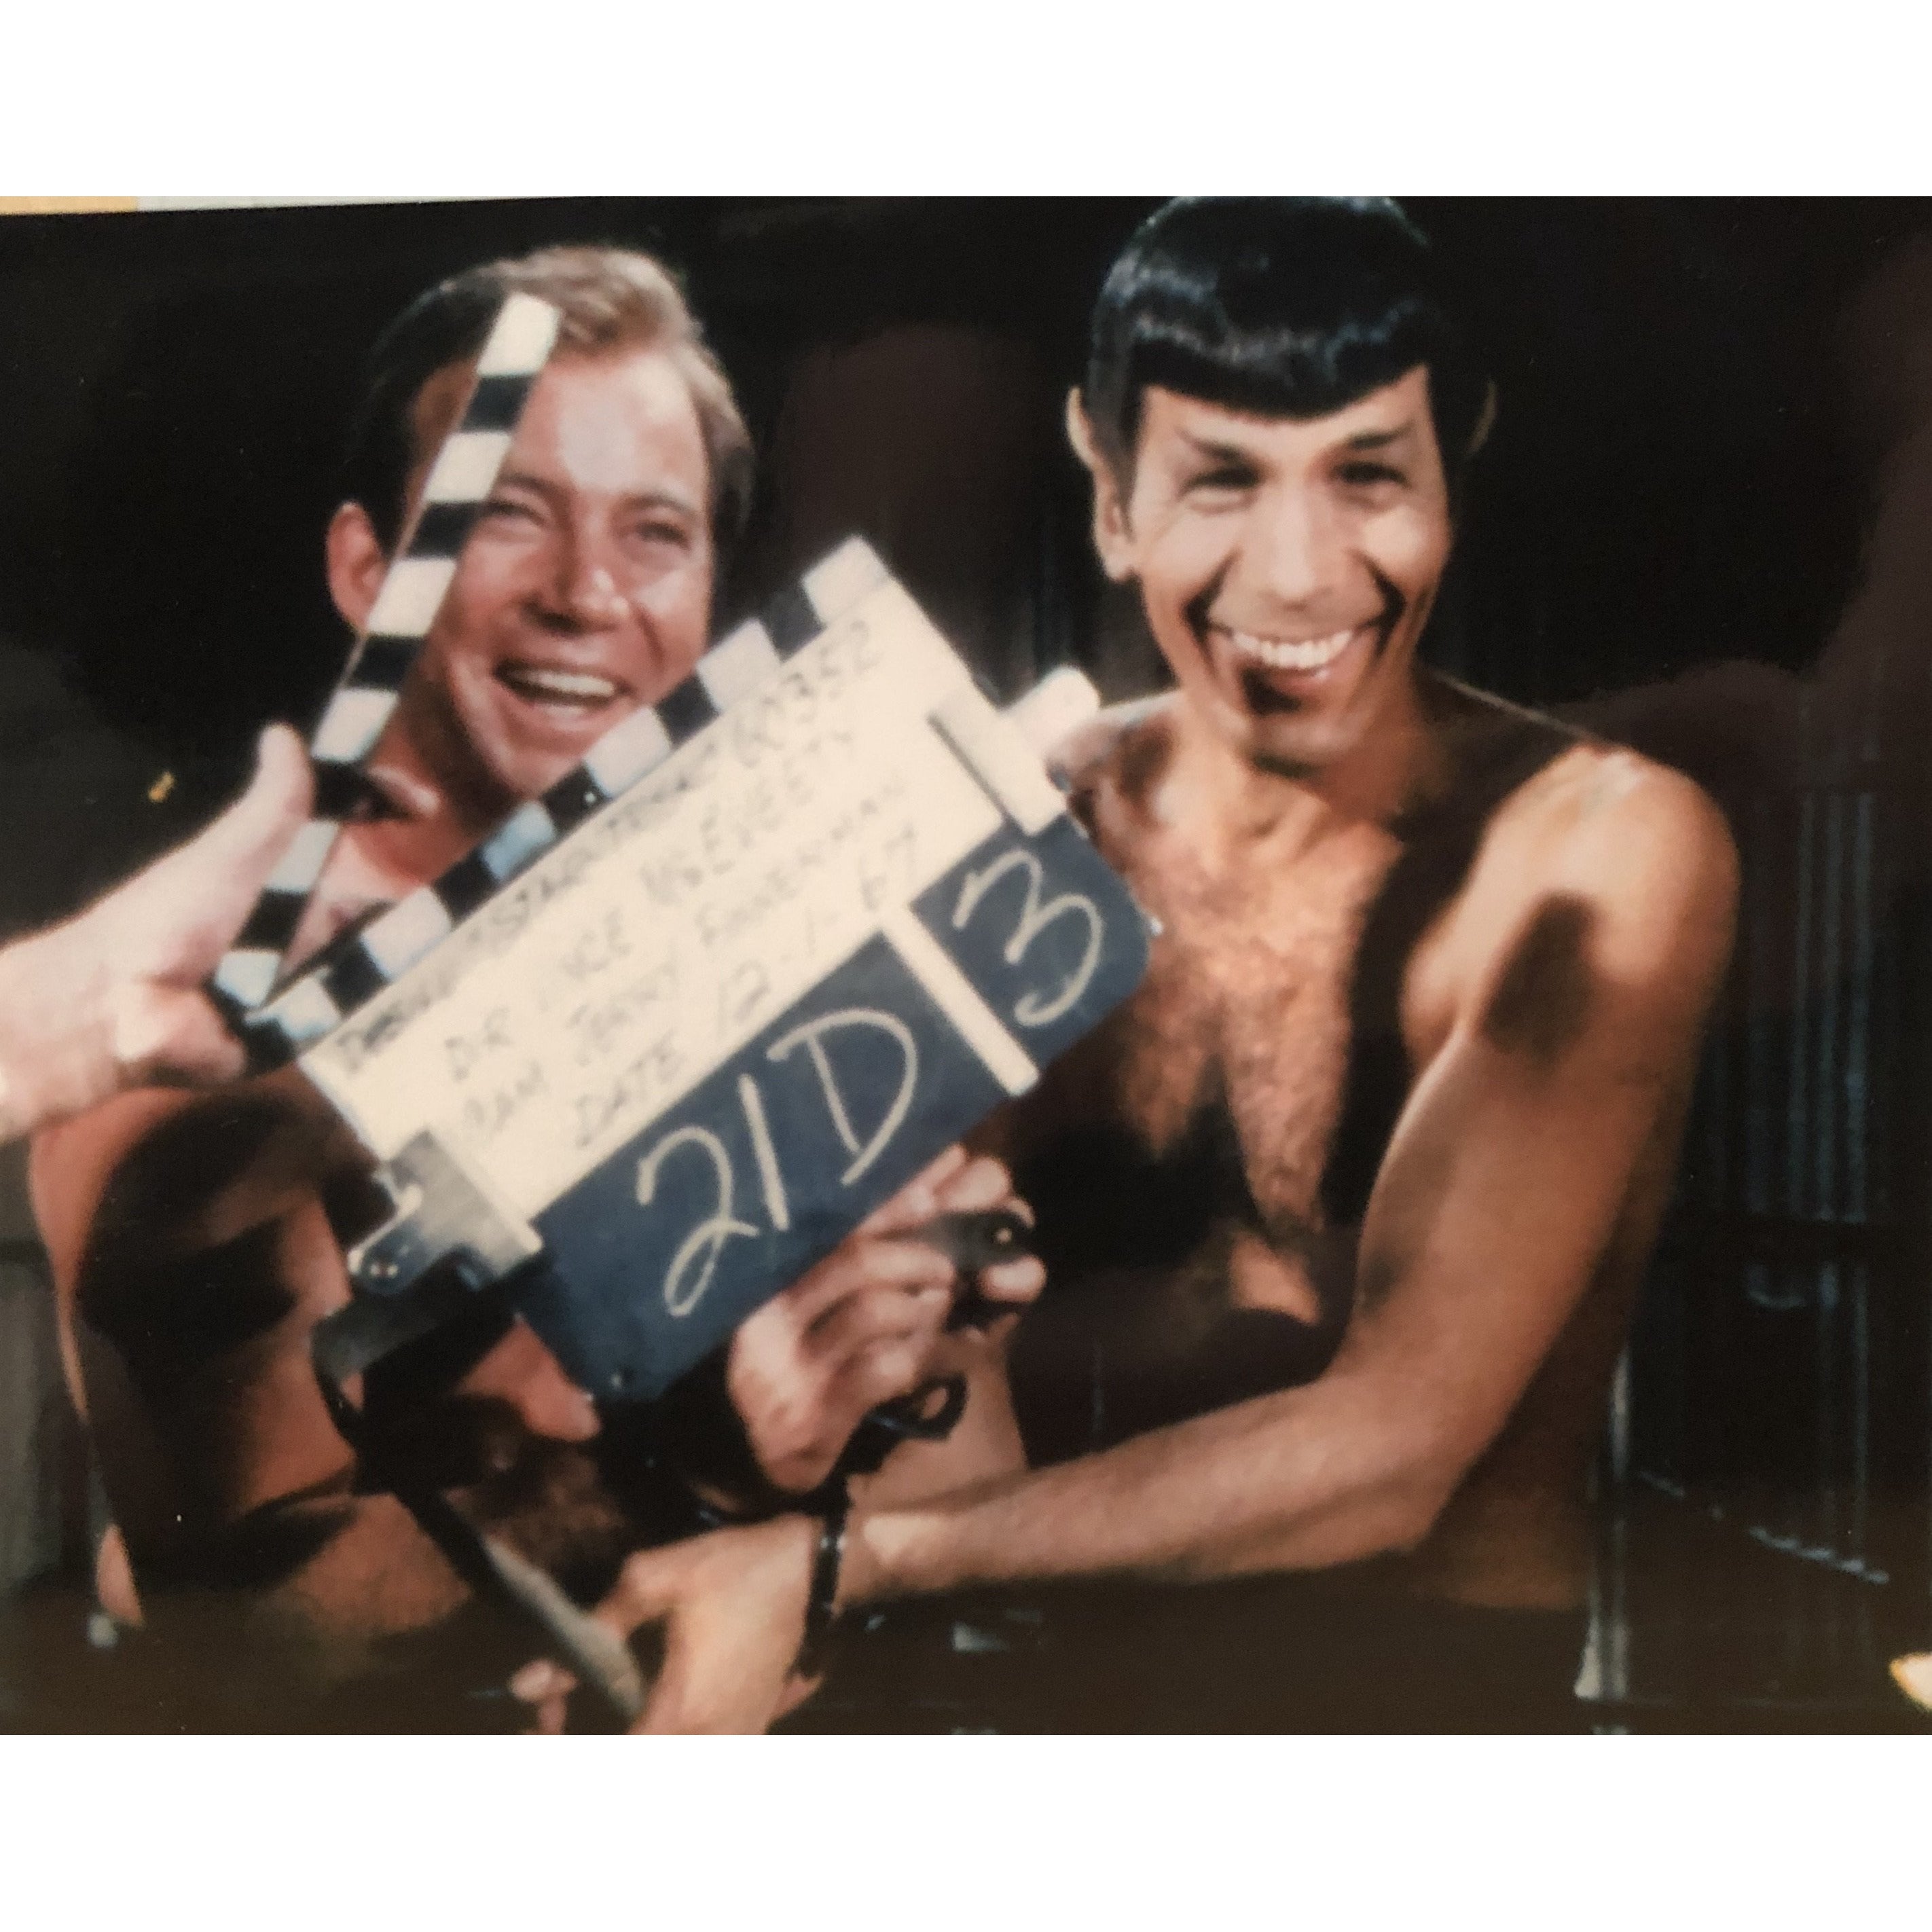 Star Trek and Mr. Spock Unsigned Photos from Leonard Nimoy's Personal Collection